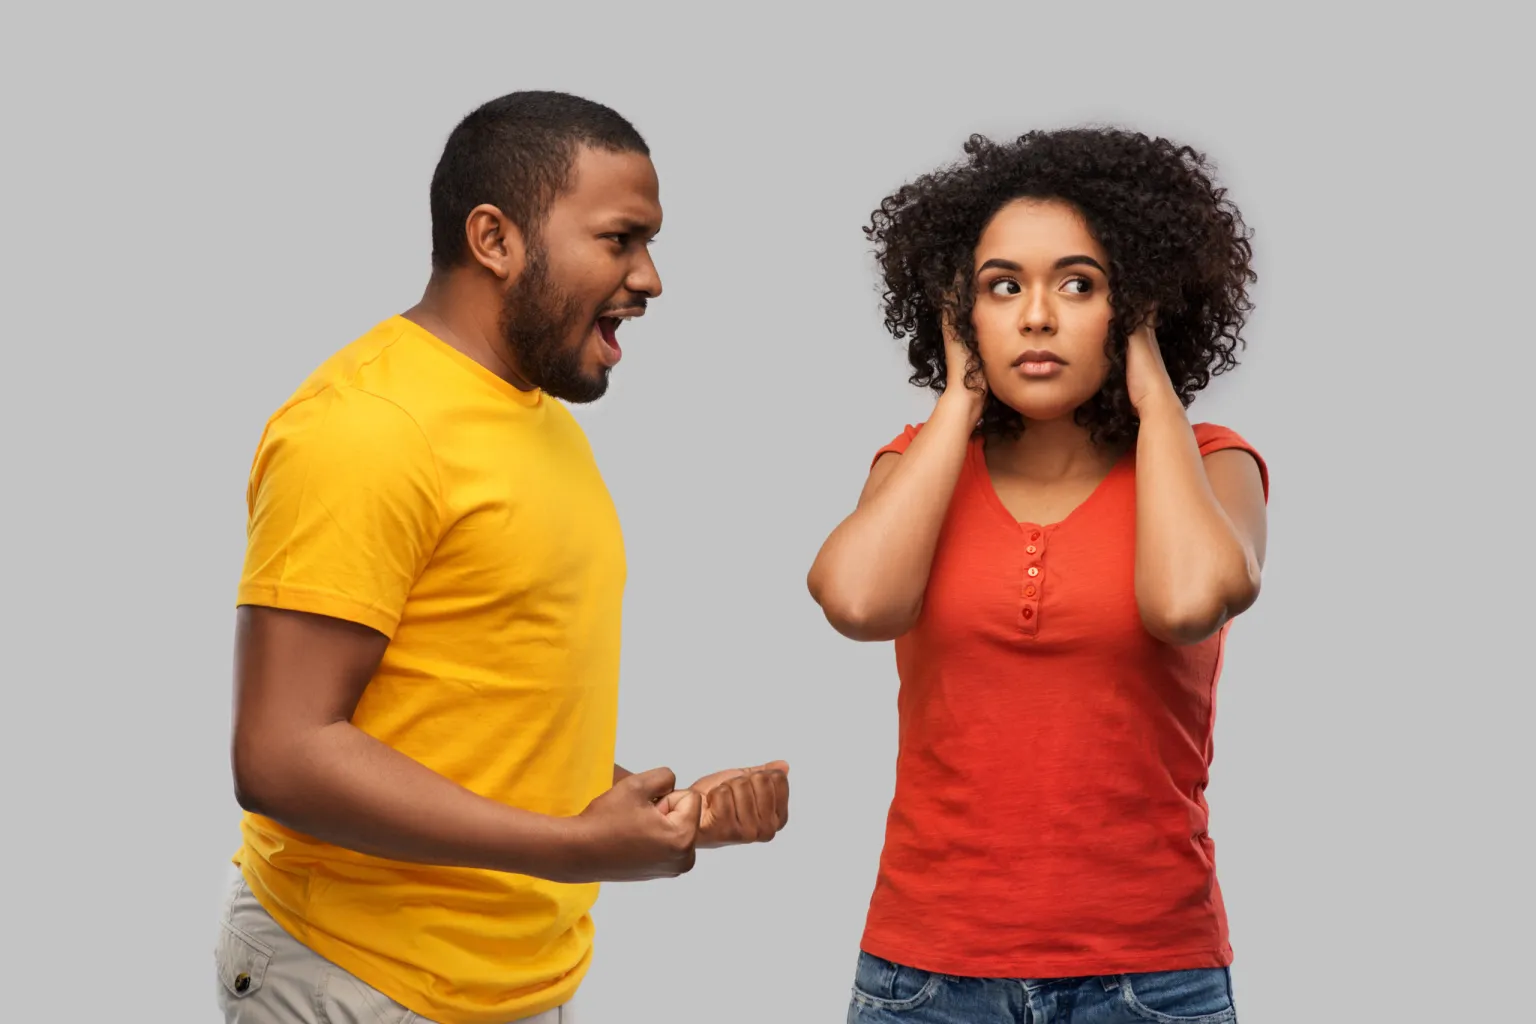 4 Reasons Why Relationships are Hard to Maintain